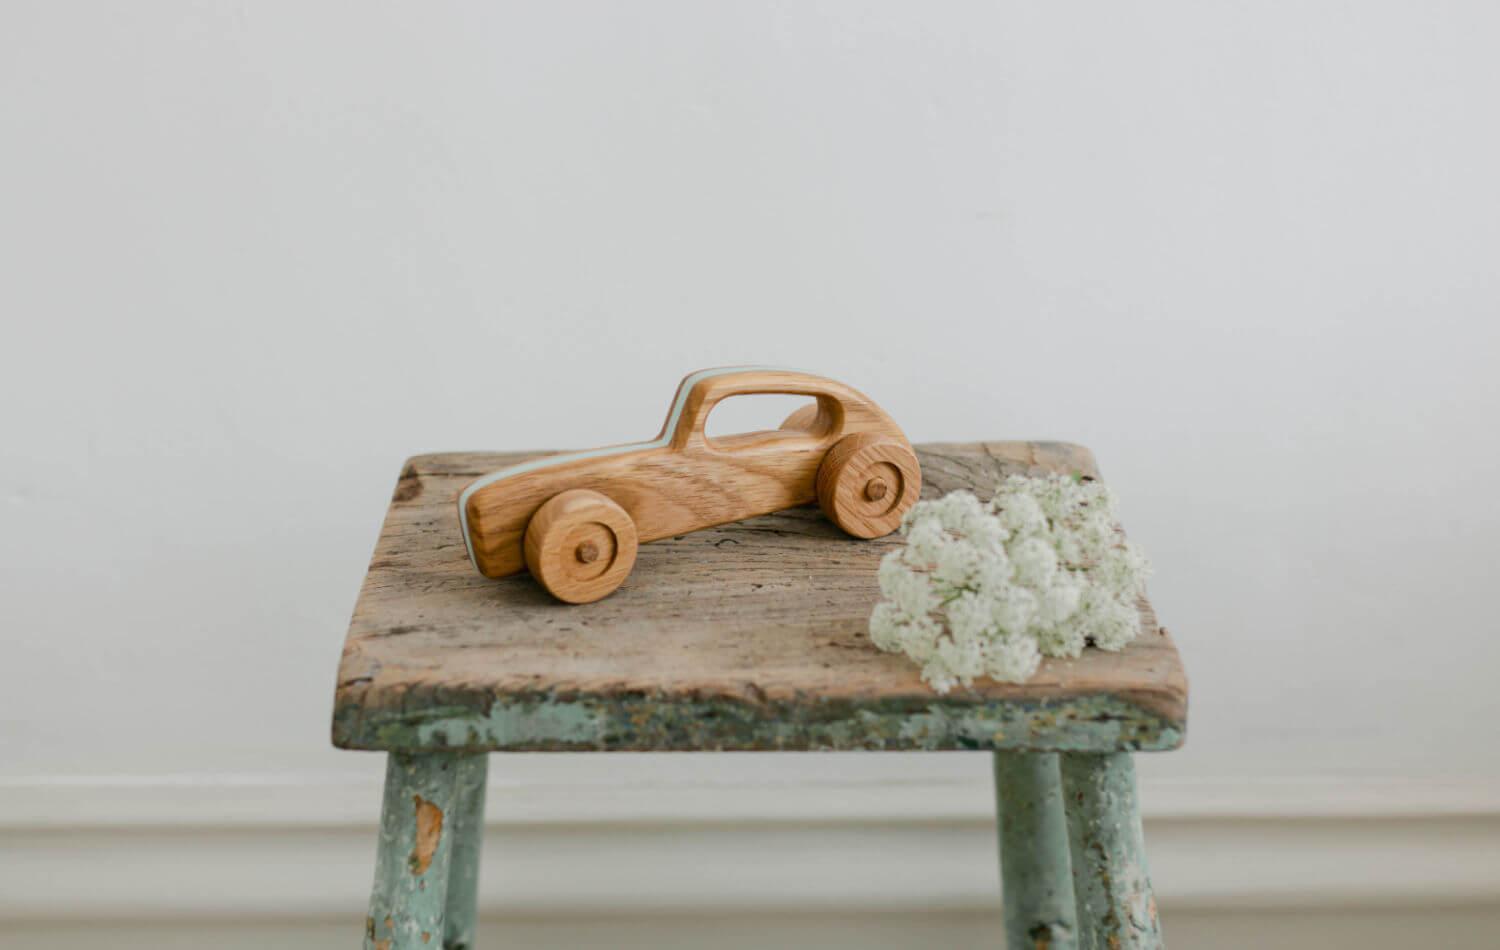 Wooden Toy Cars & Vehicles - That Stand the Test of Time